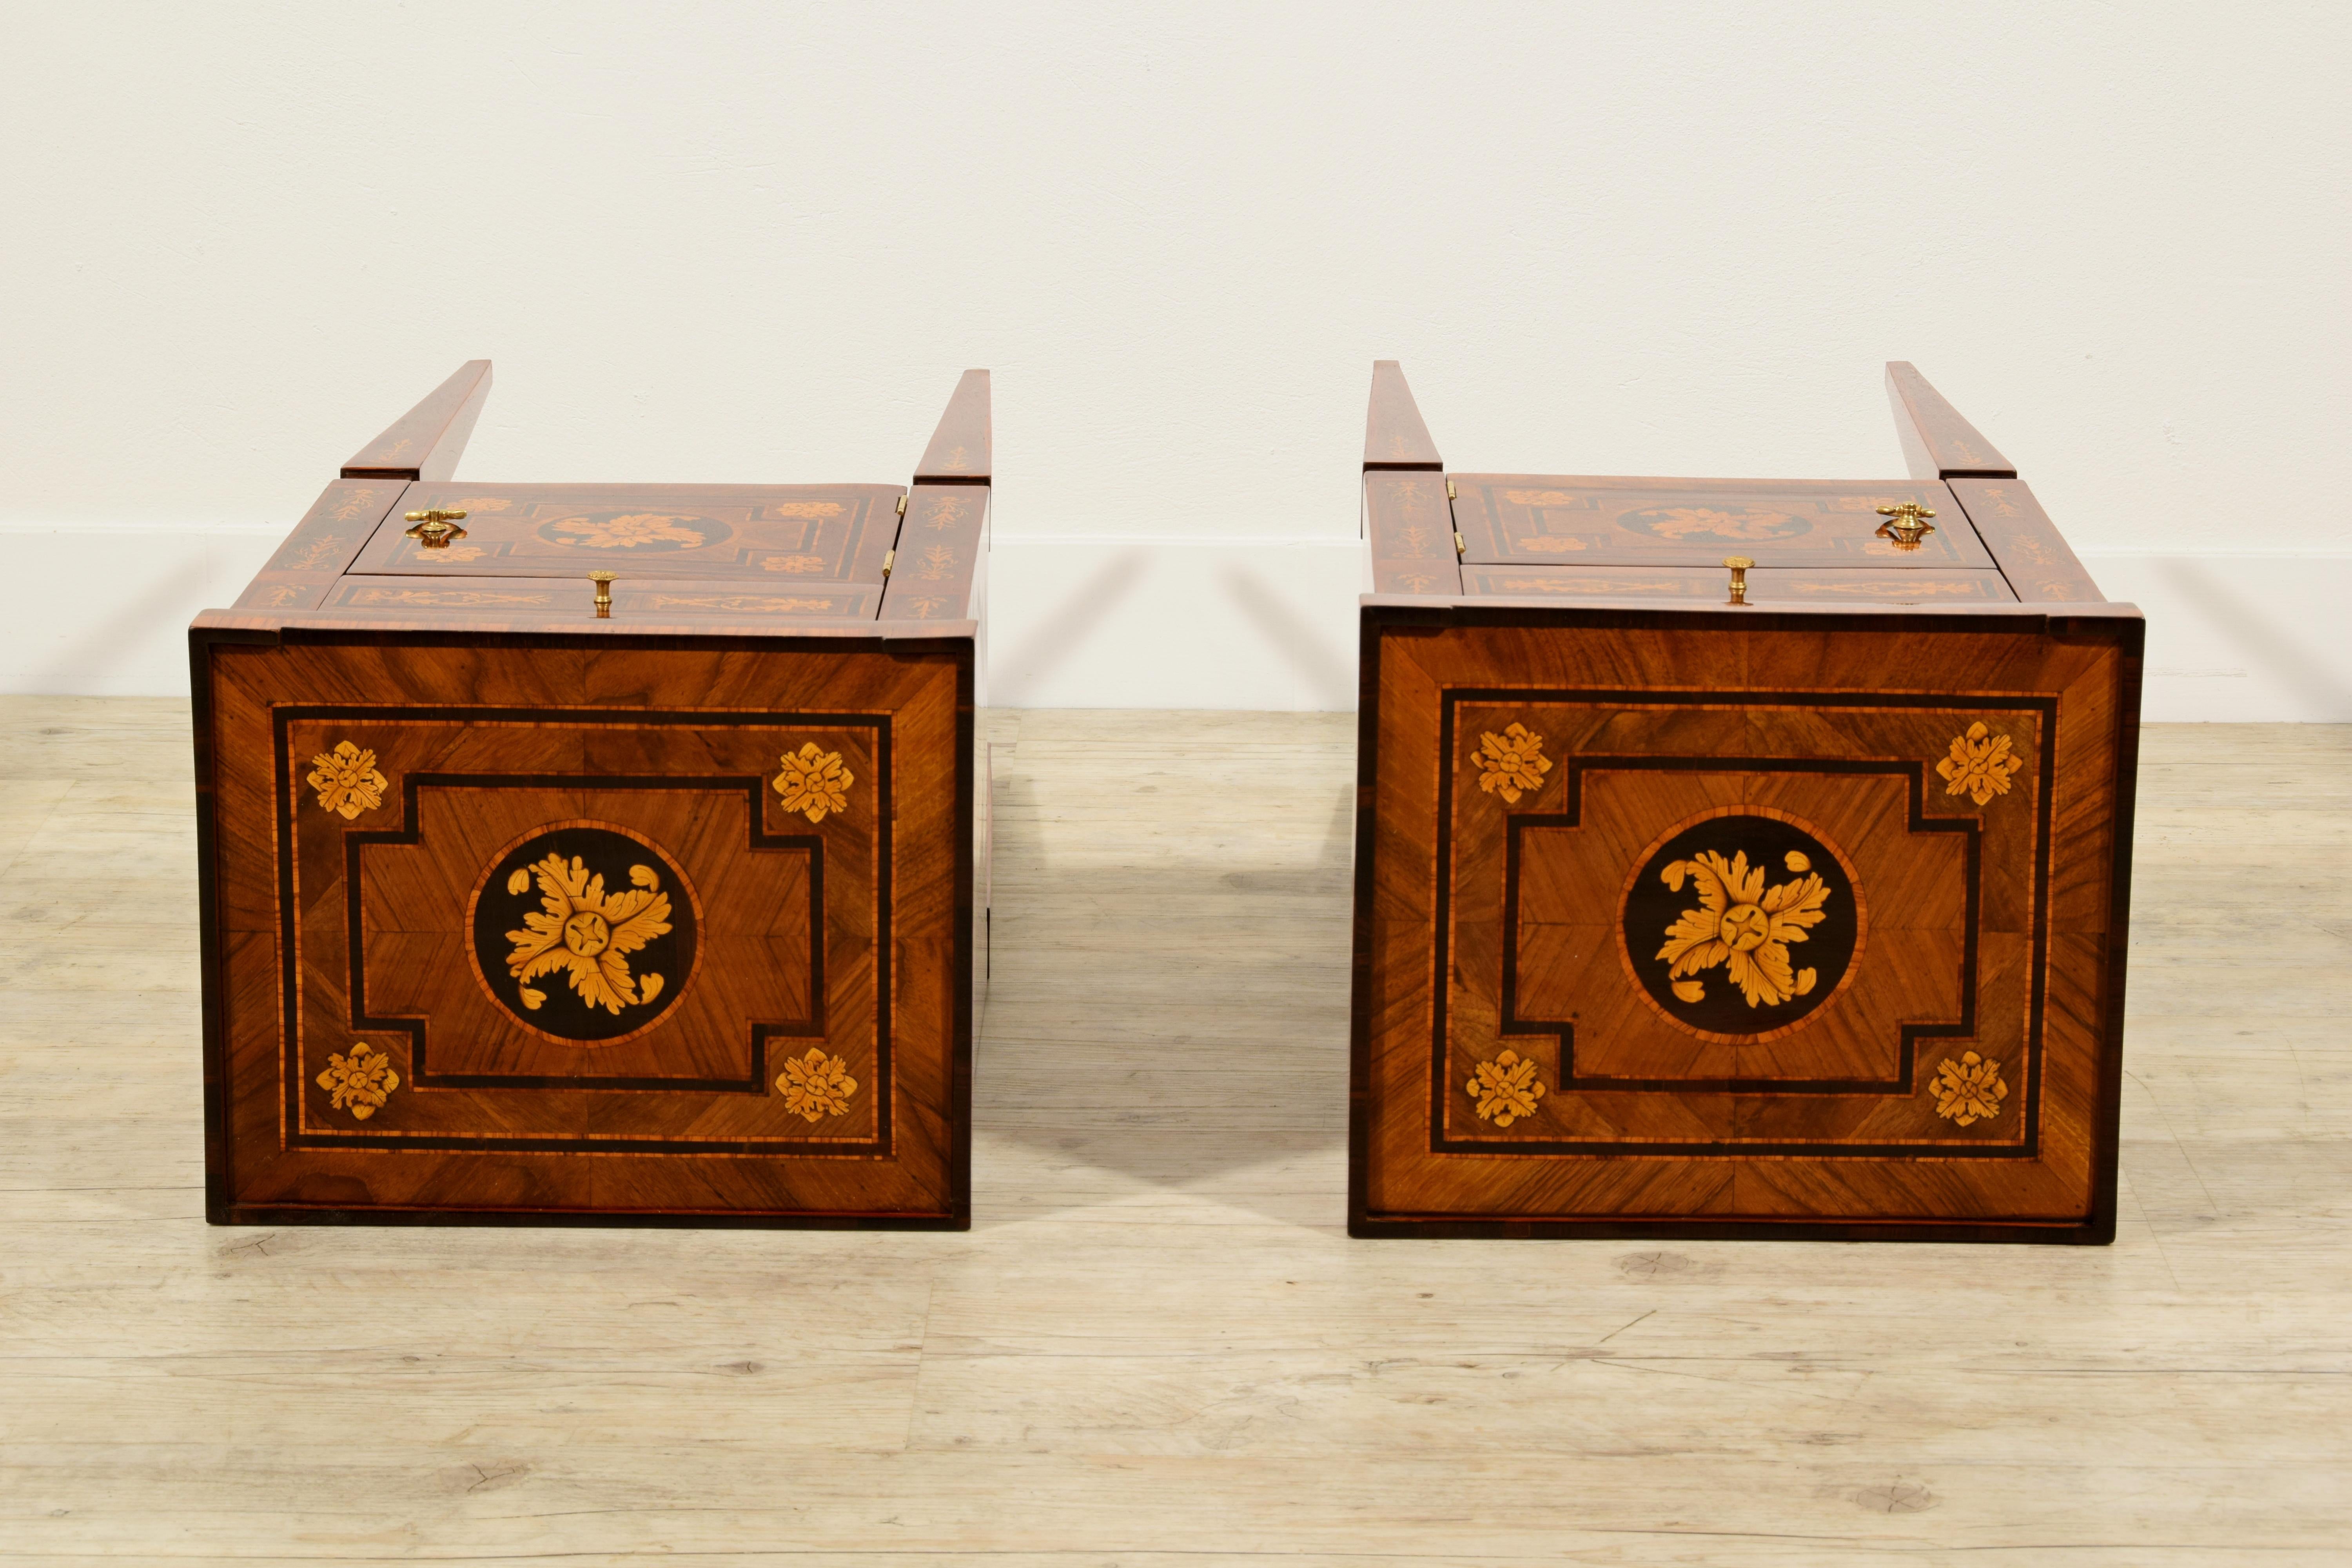 18th Century, Pair of Italian Neoclassical Inlaid Wood Bedside Tables 17